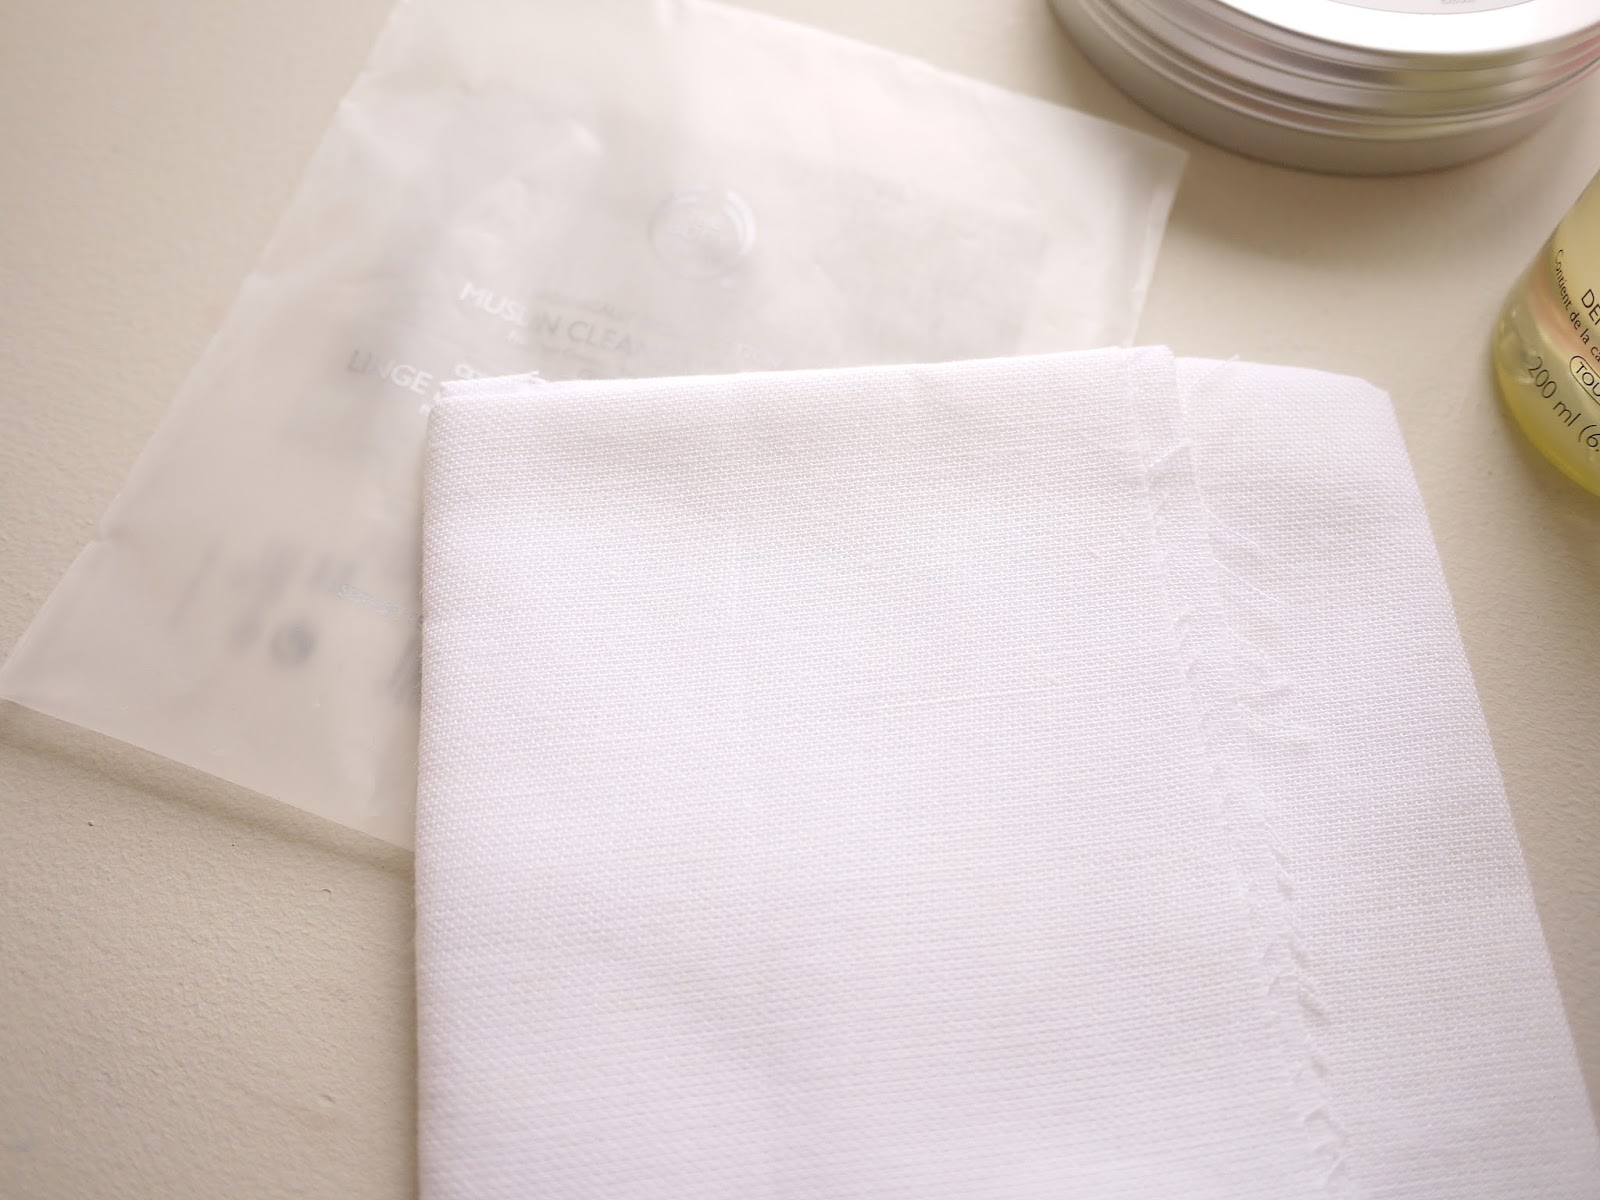 The Body Shop Muslin Cleansing Cloth review